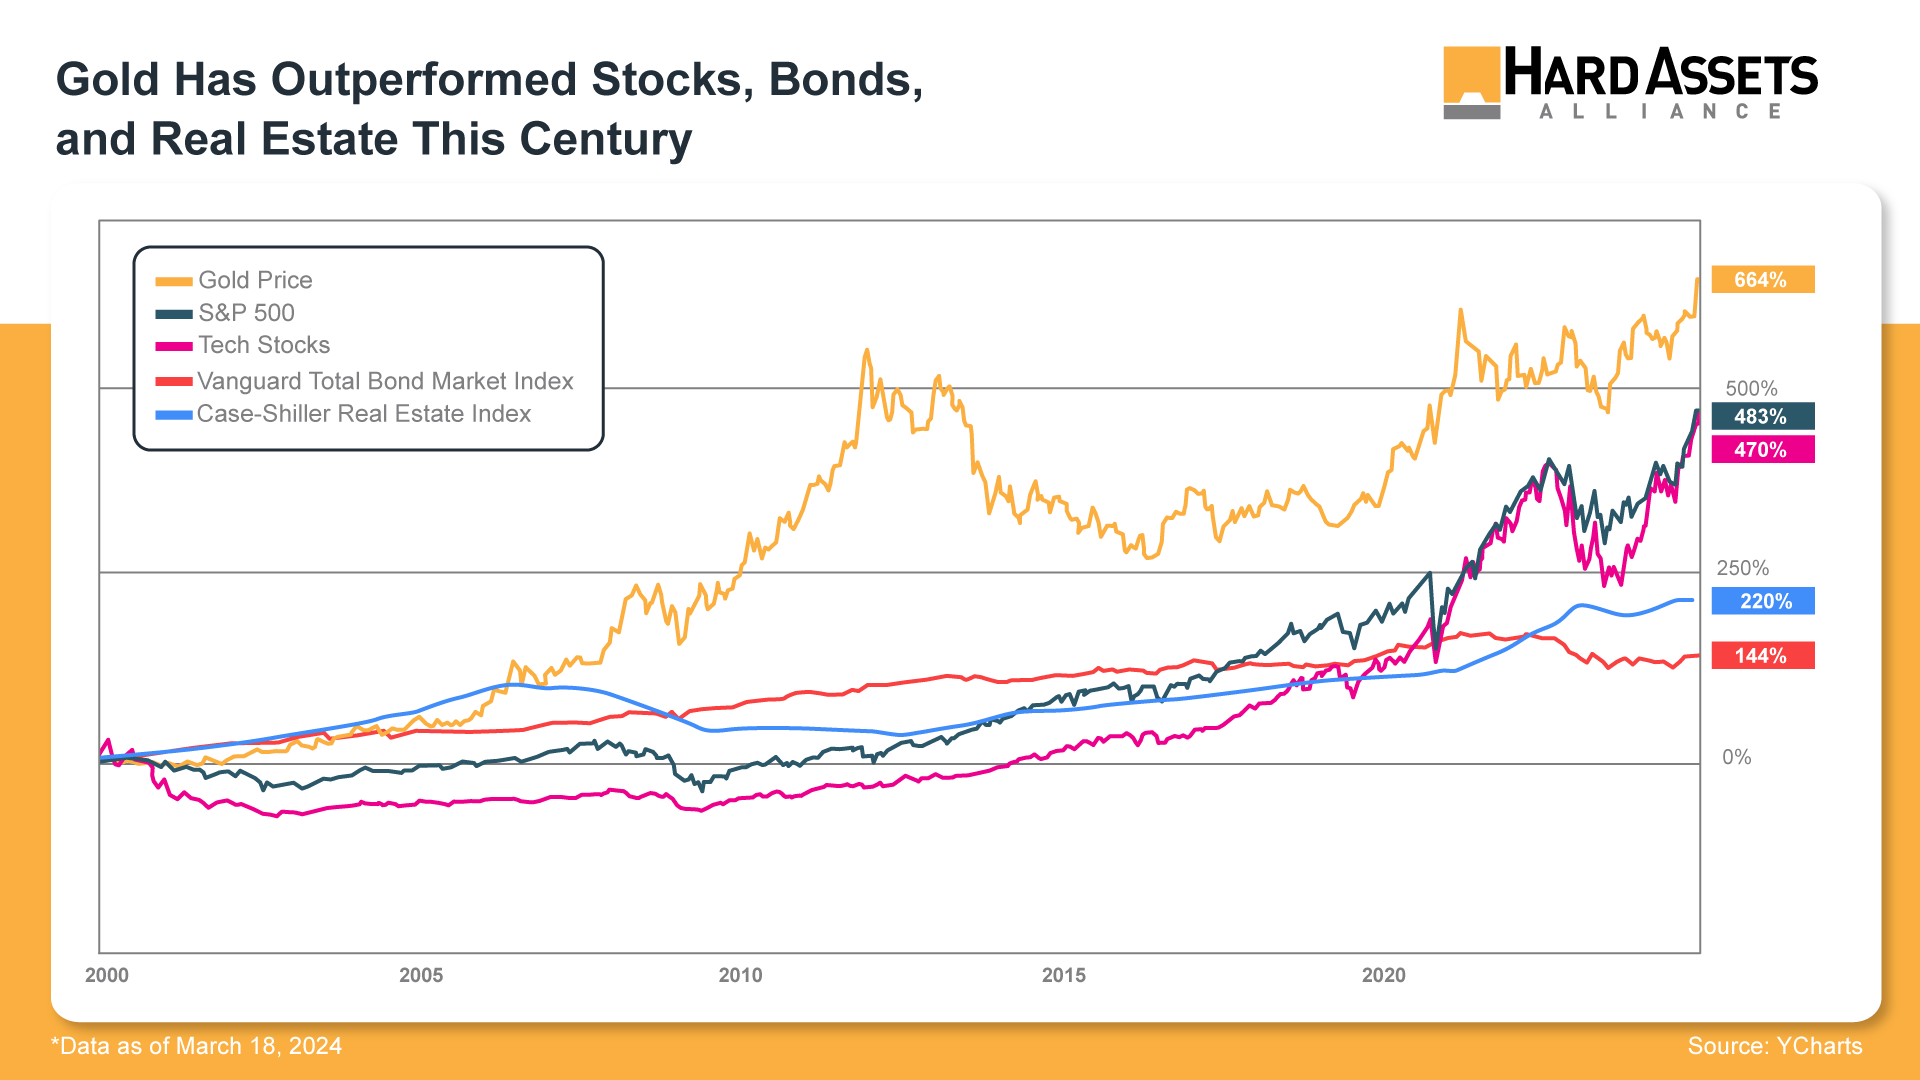 Gold Has Outperformed Stocks, Bonds, and Real Estate This Century